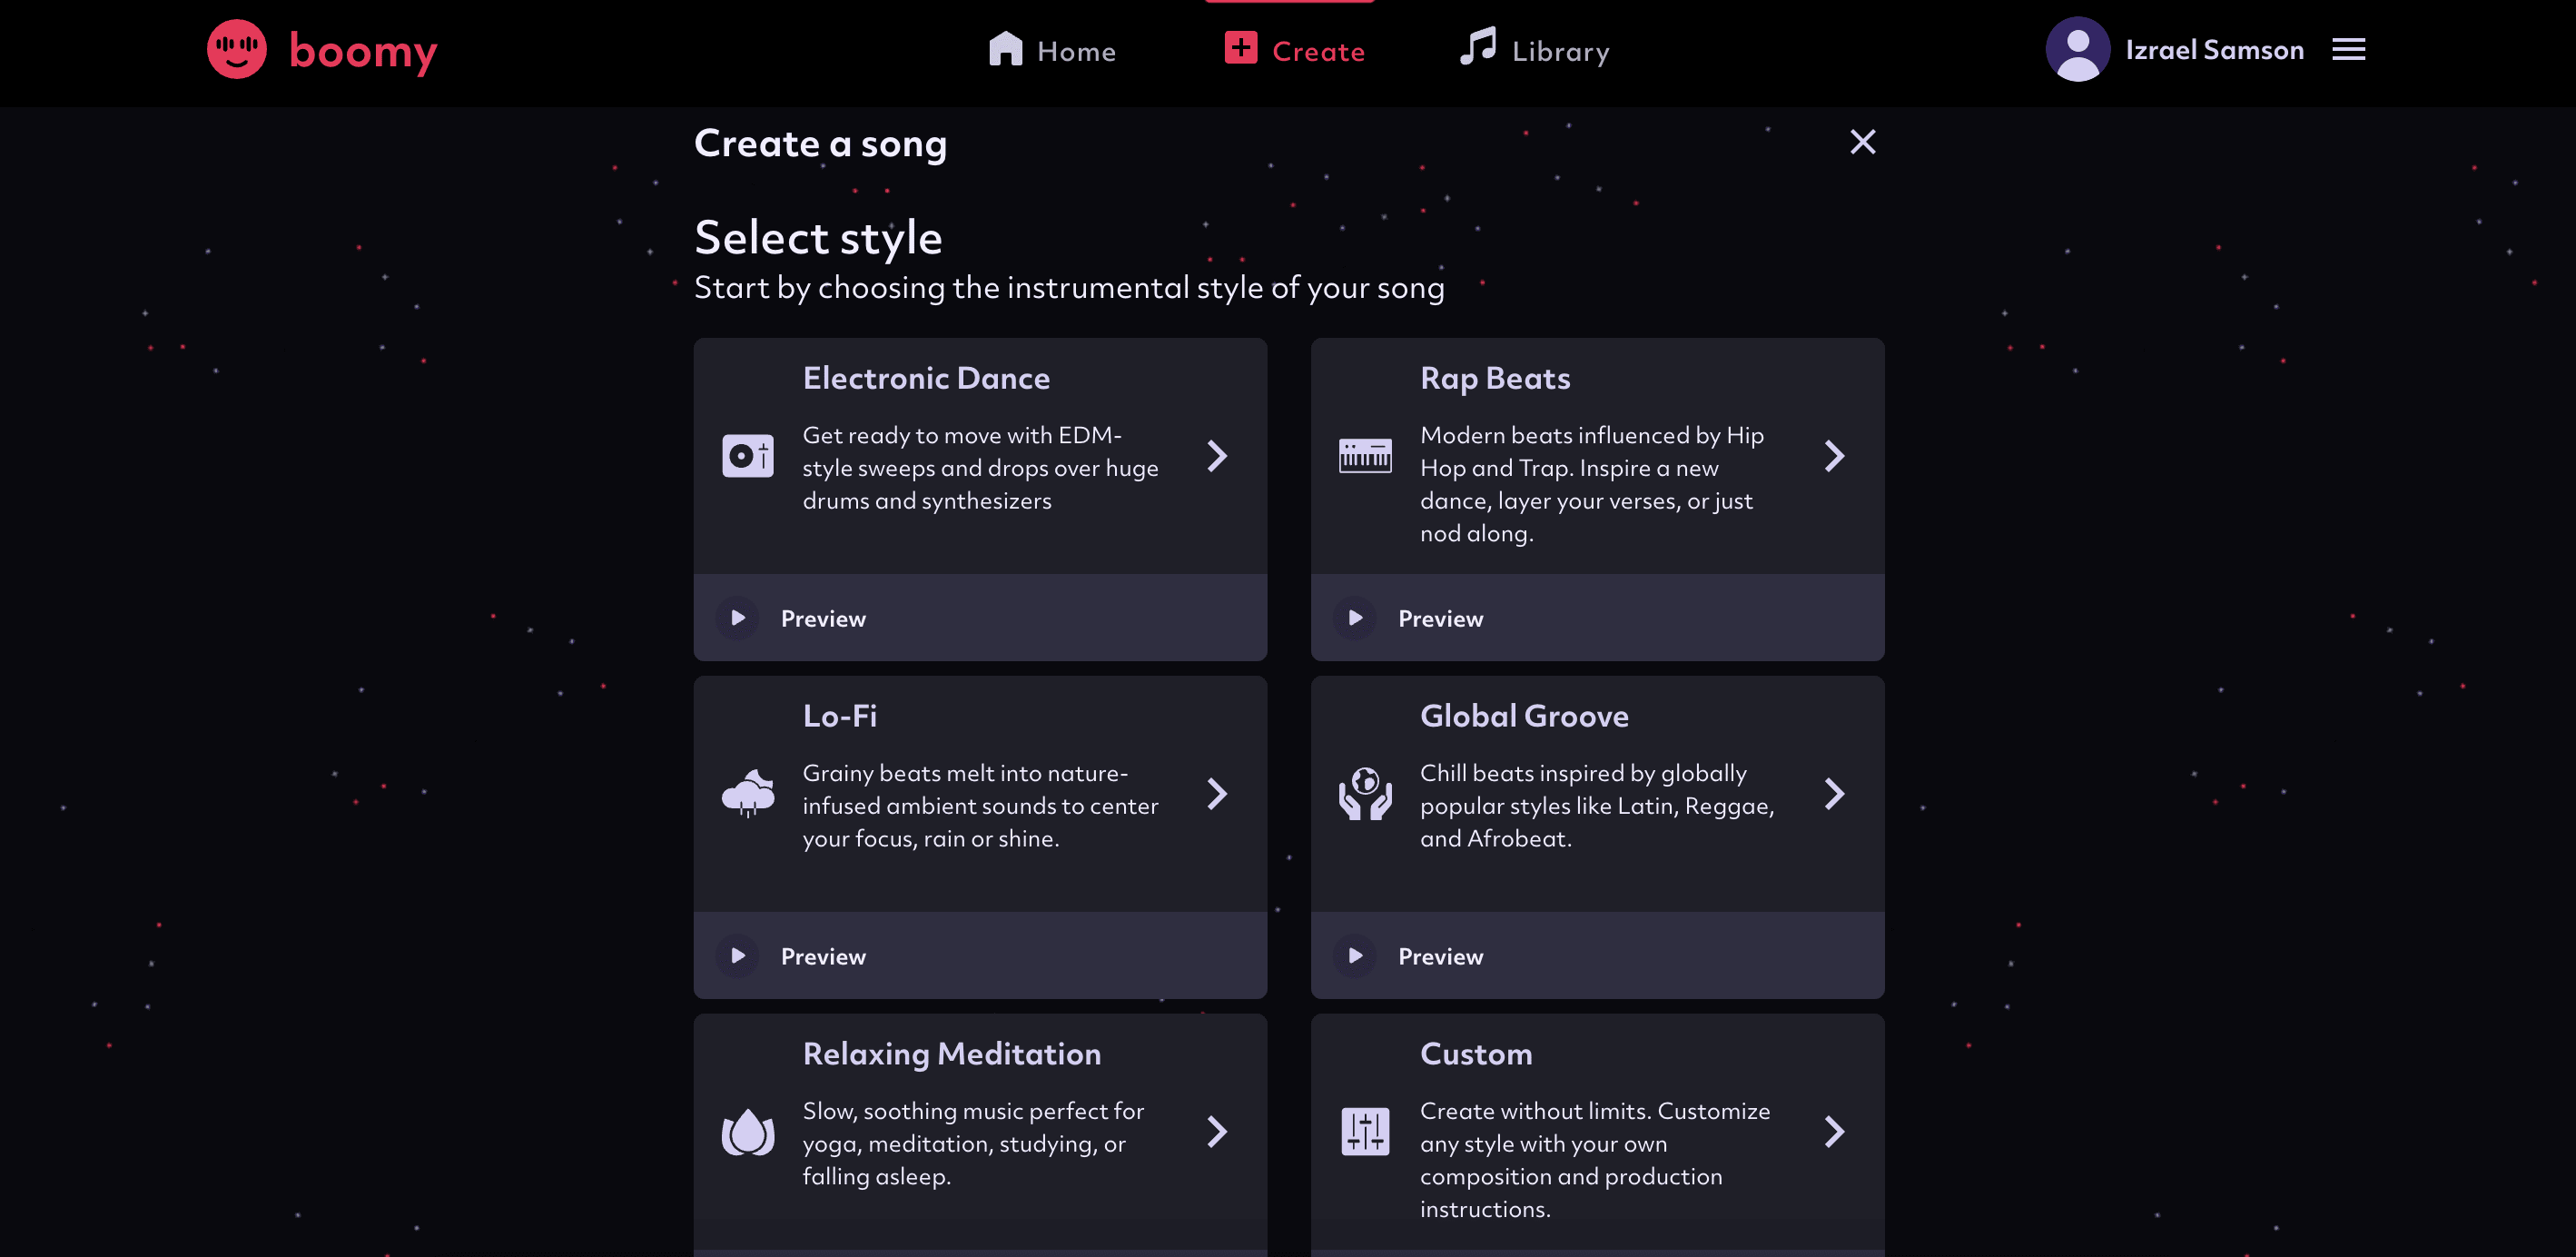 Create song and select style category on Boomy